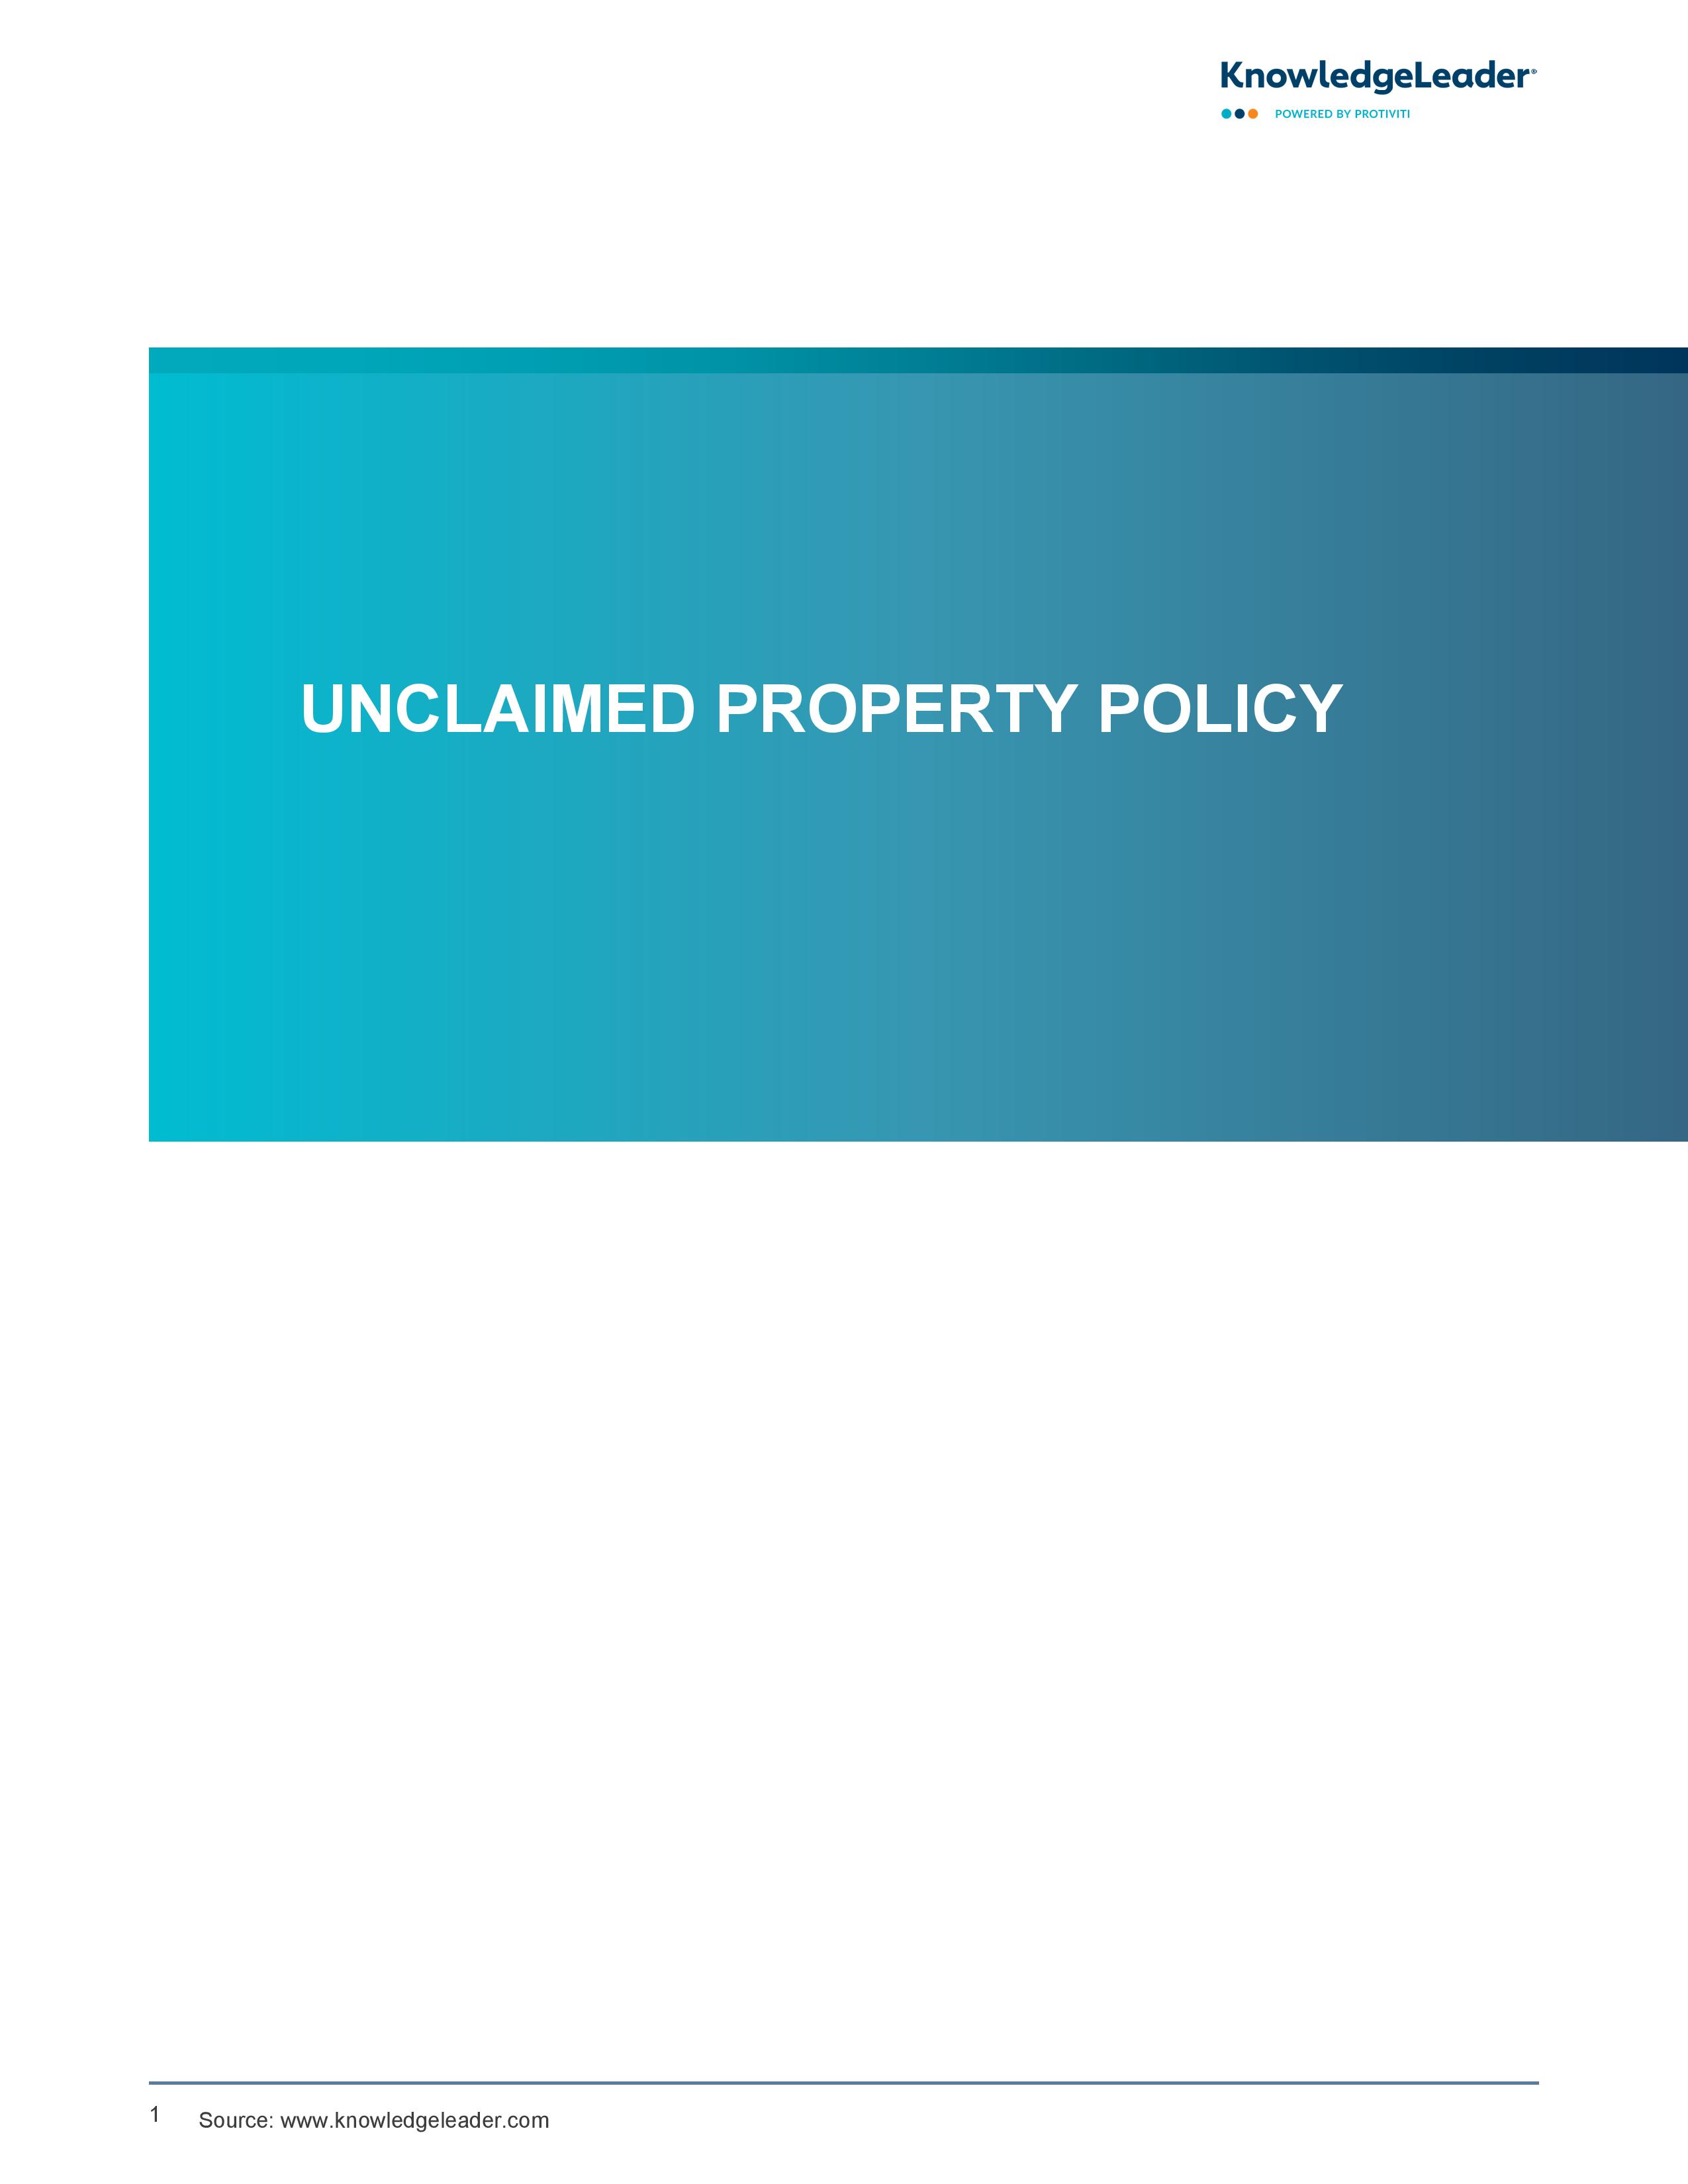 screenshot of the first page of Unclaimed Property Policy